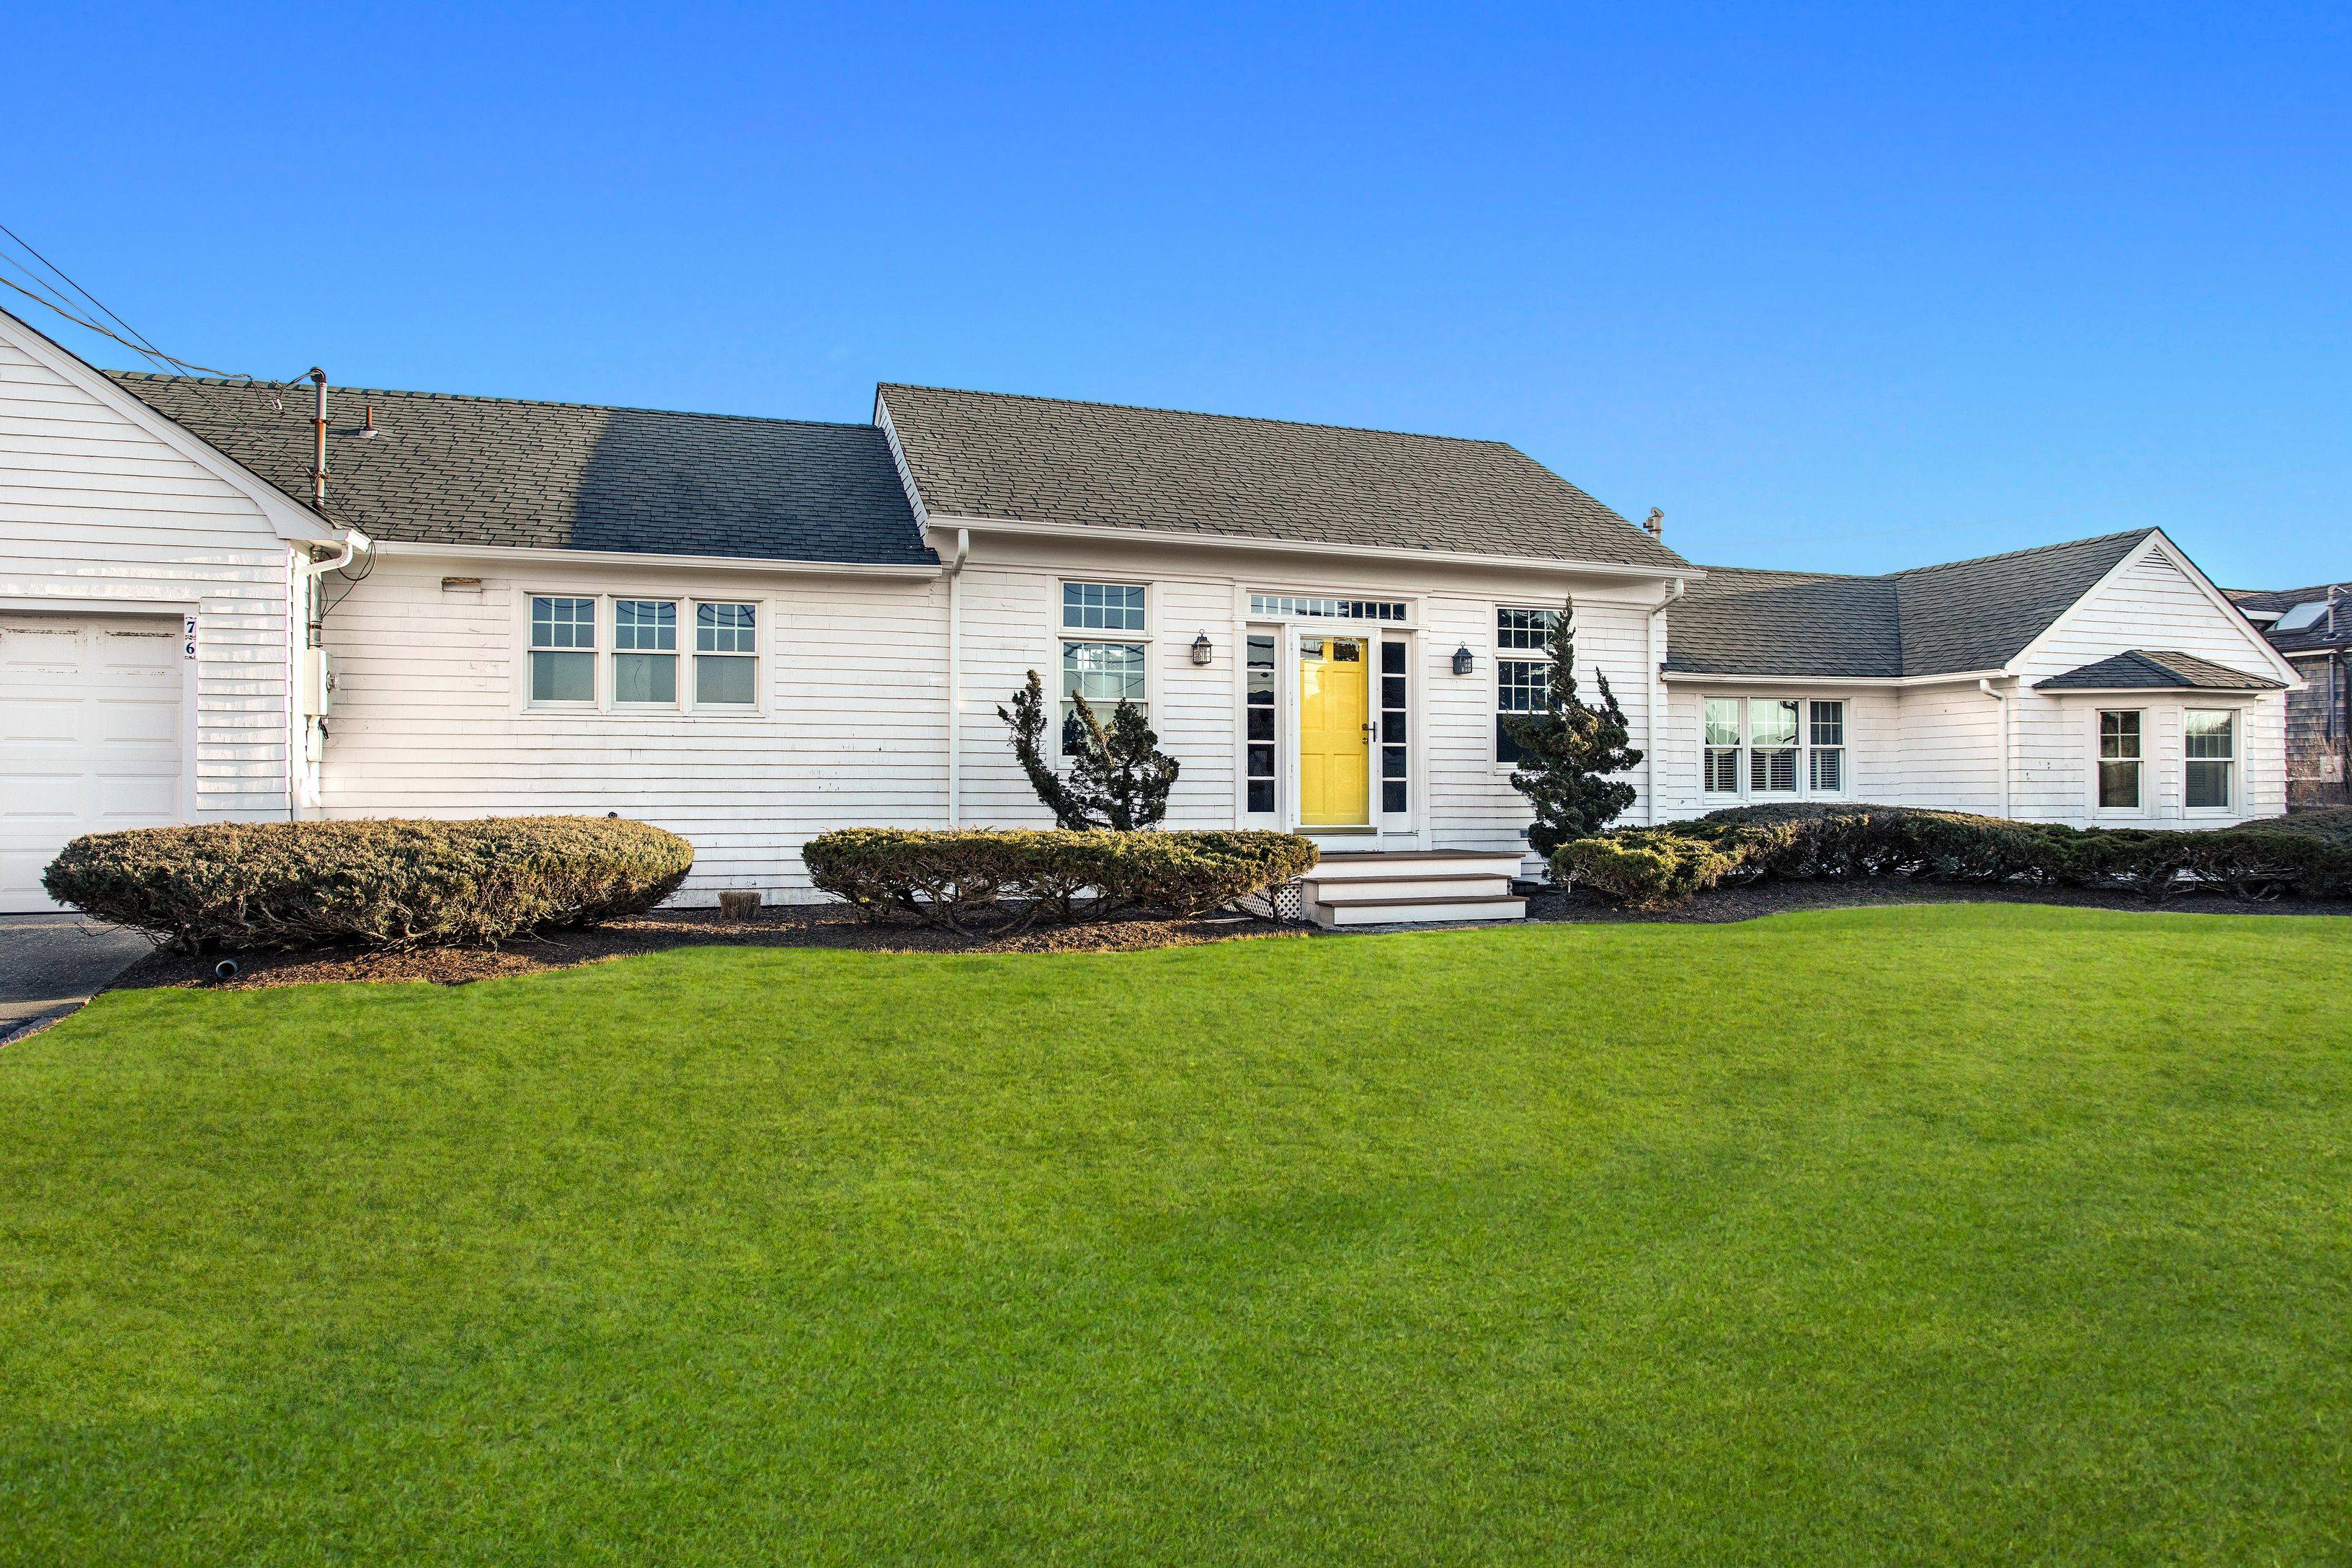 Ideal Quogue Village rental situated on the prestigious Dune Road